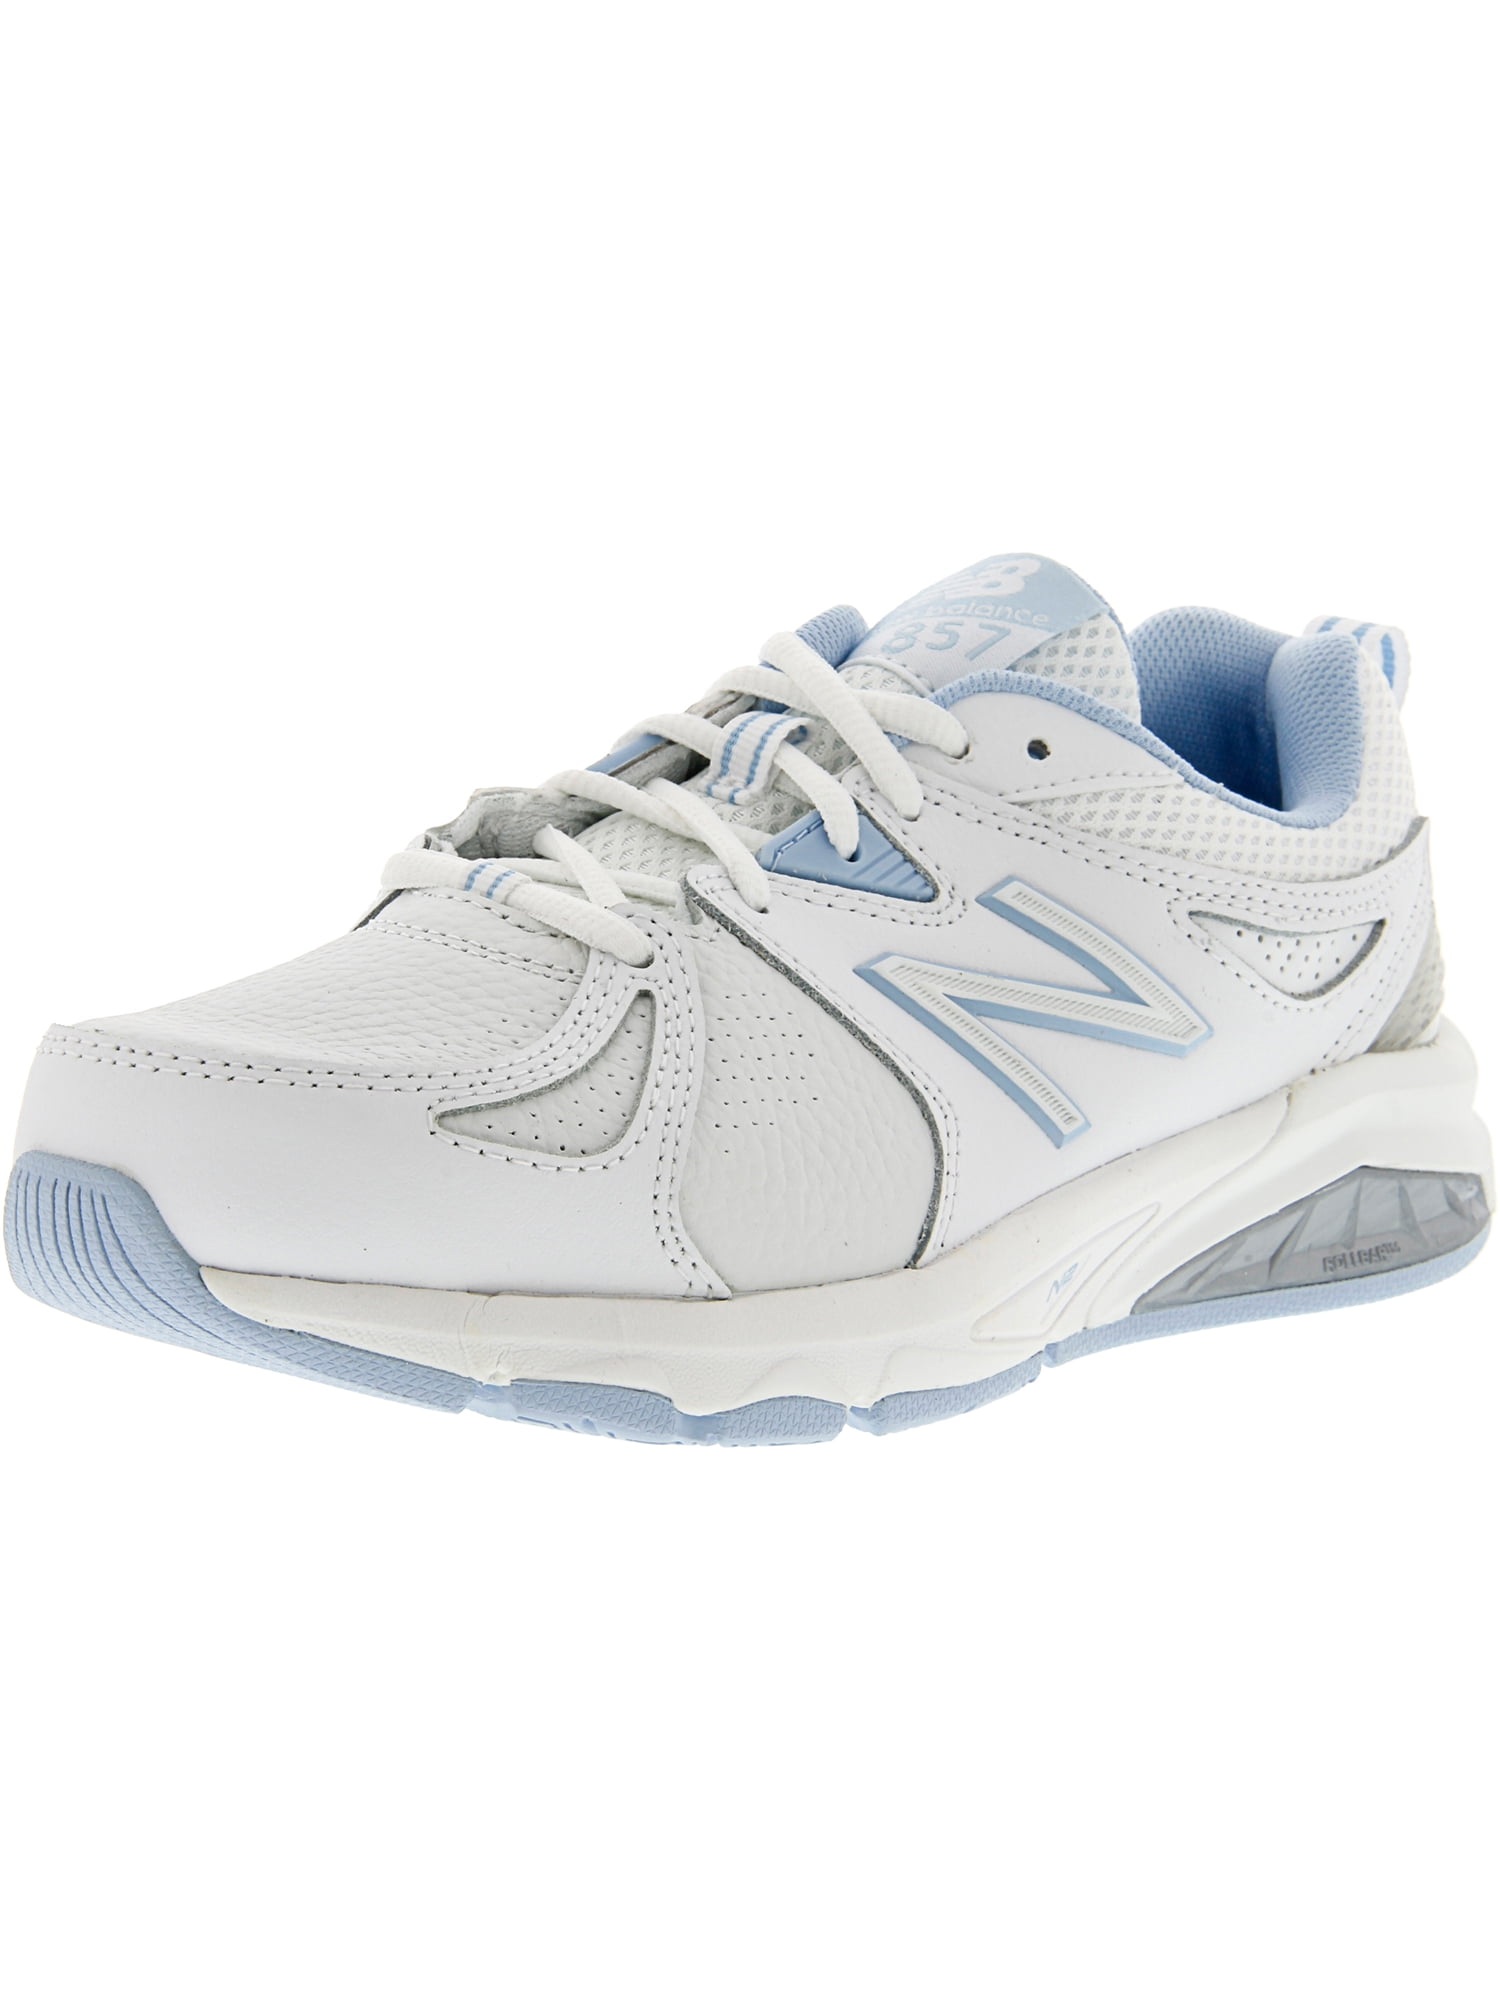 new balance ankle support shoes